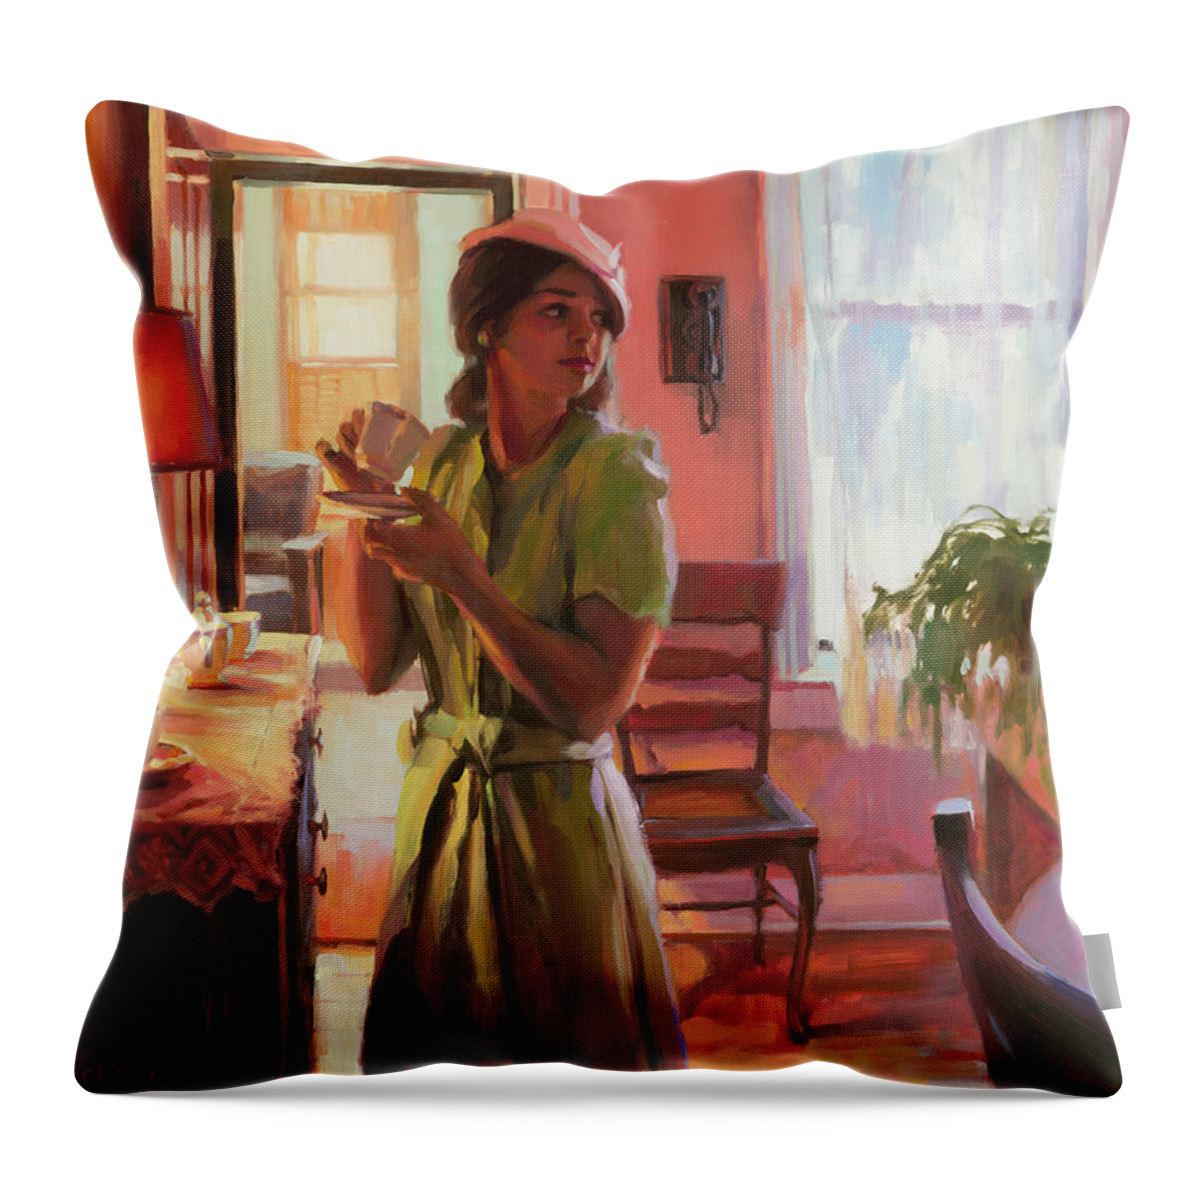 Nostalgia Throw Pillow featuring the painting Midday Tea by Steve Henderson